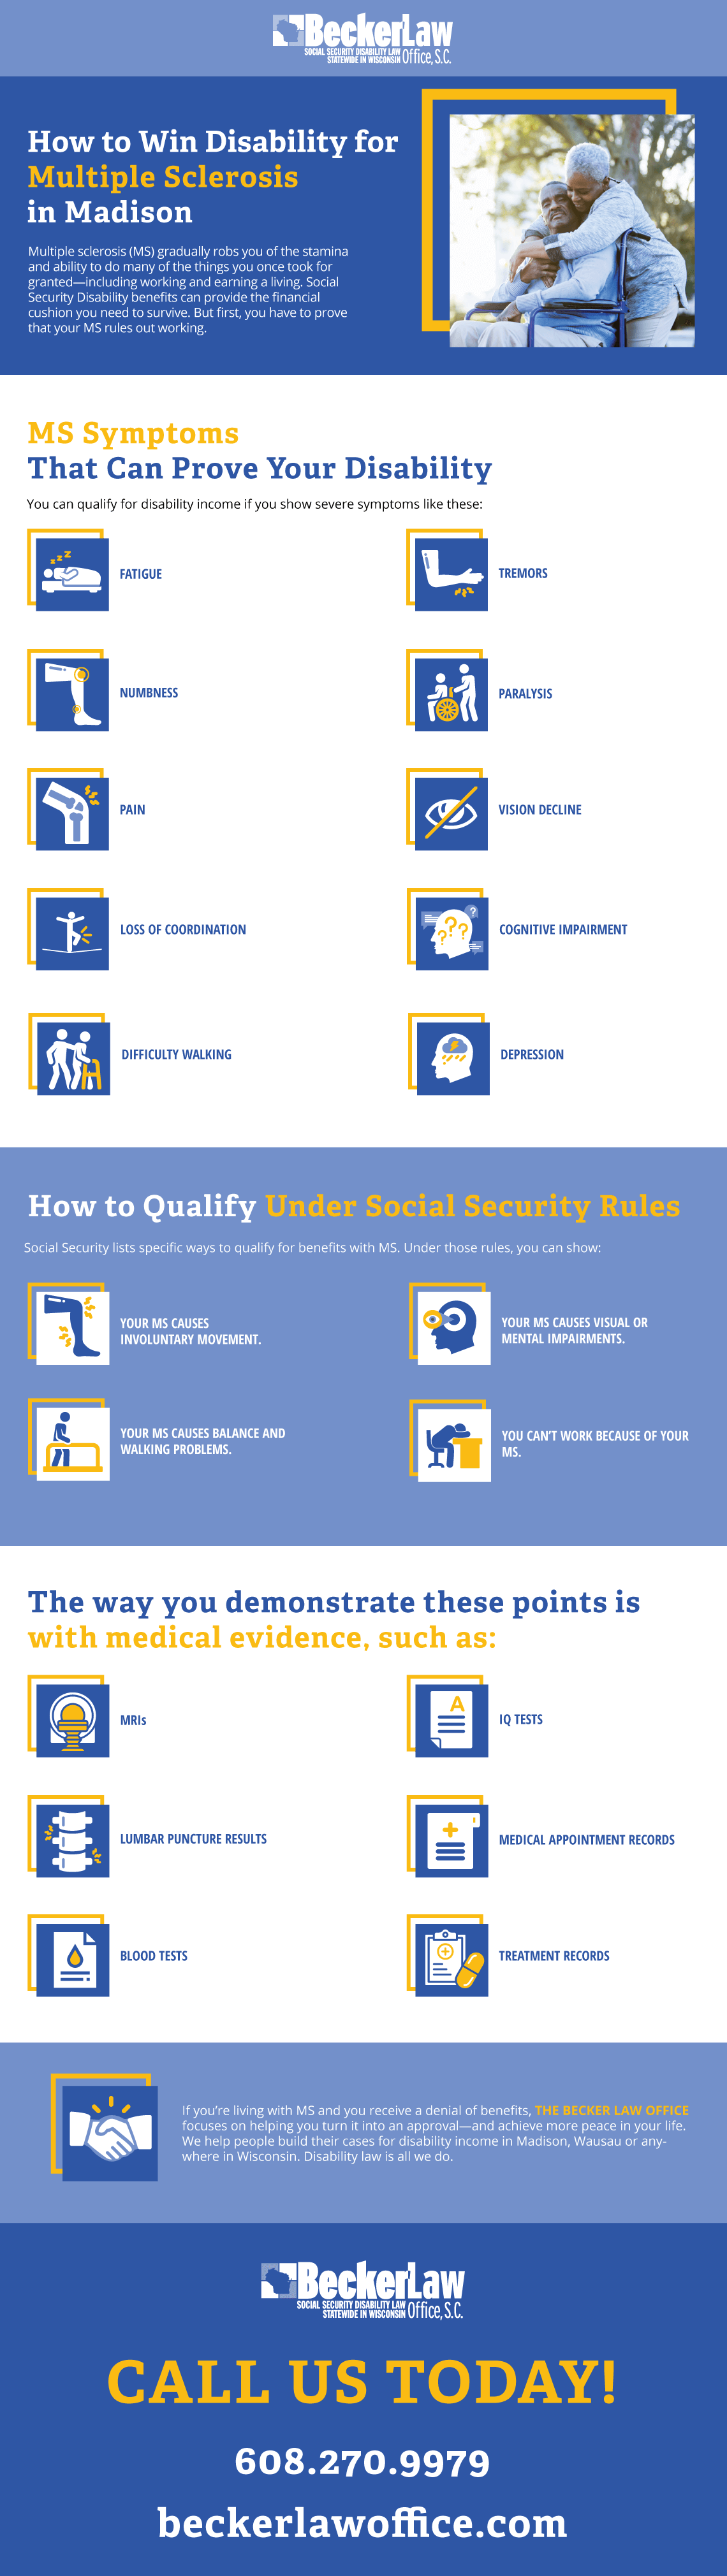 An infographic detailing how to win disability for multiple sclerosis.